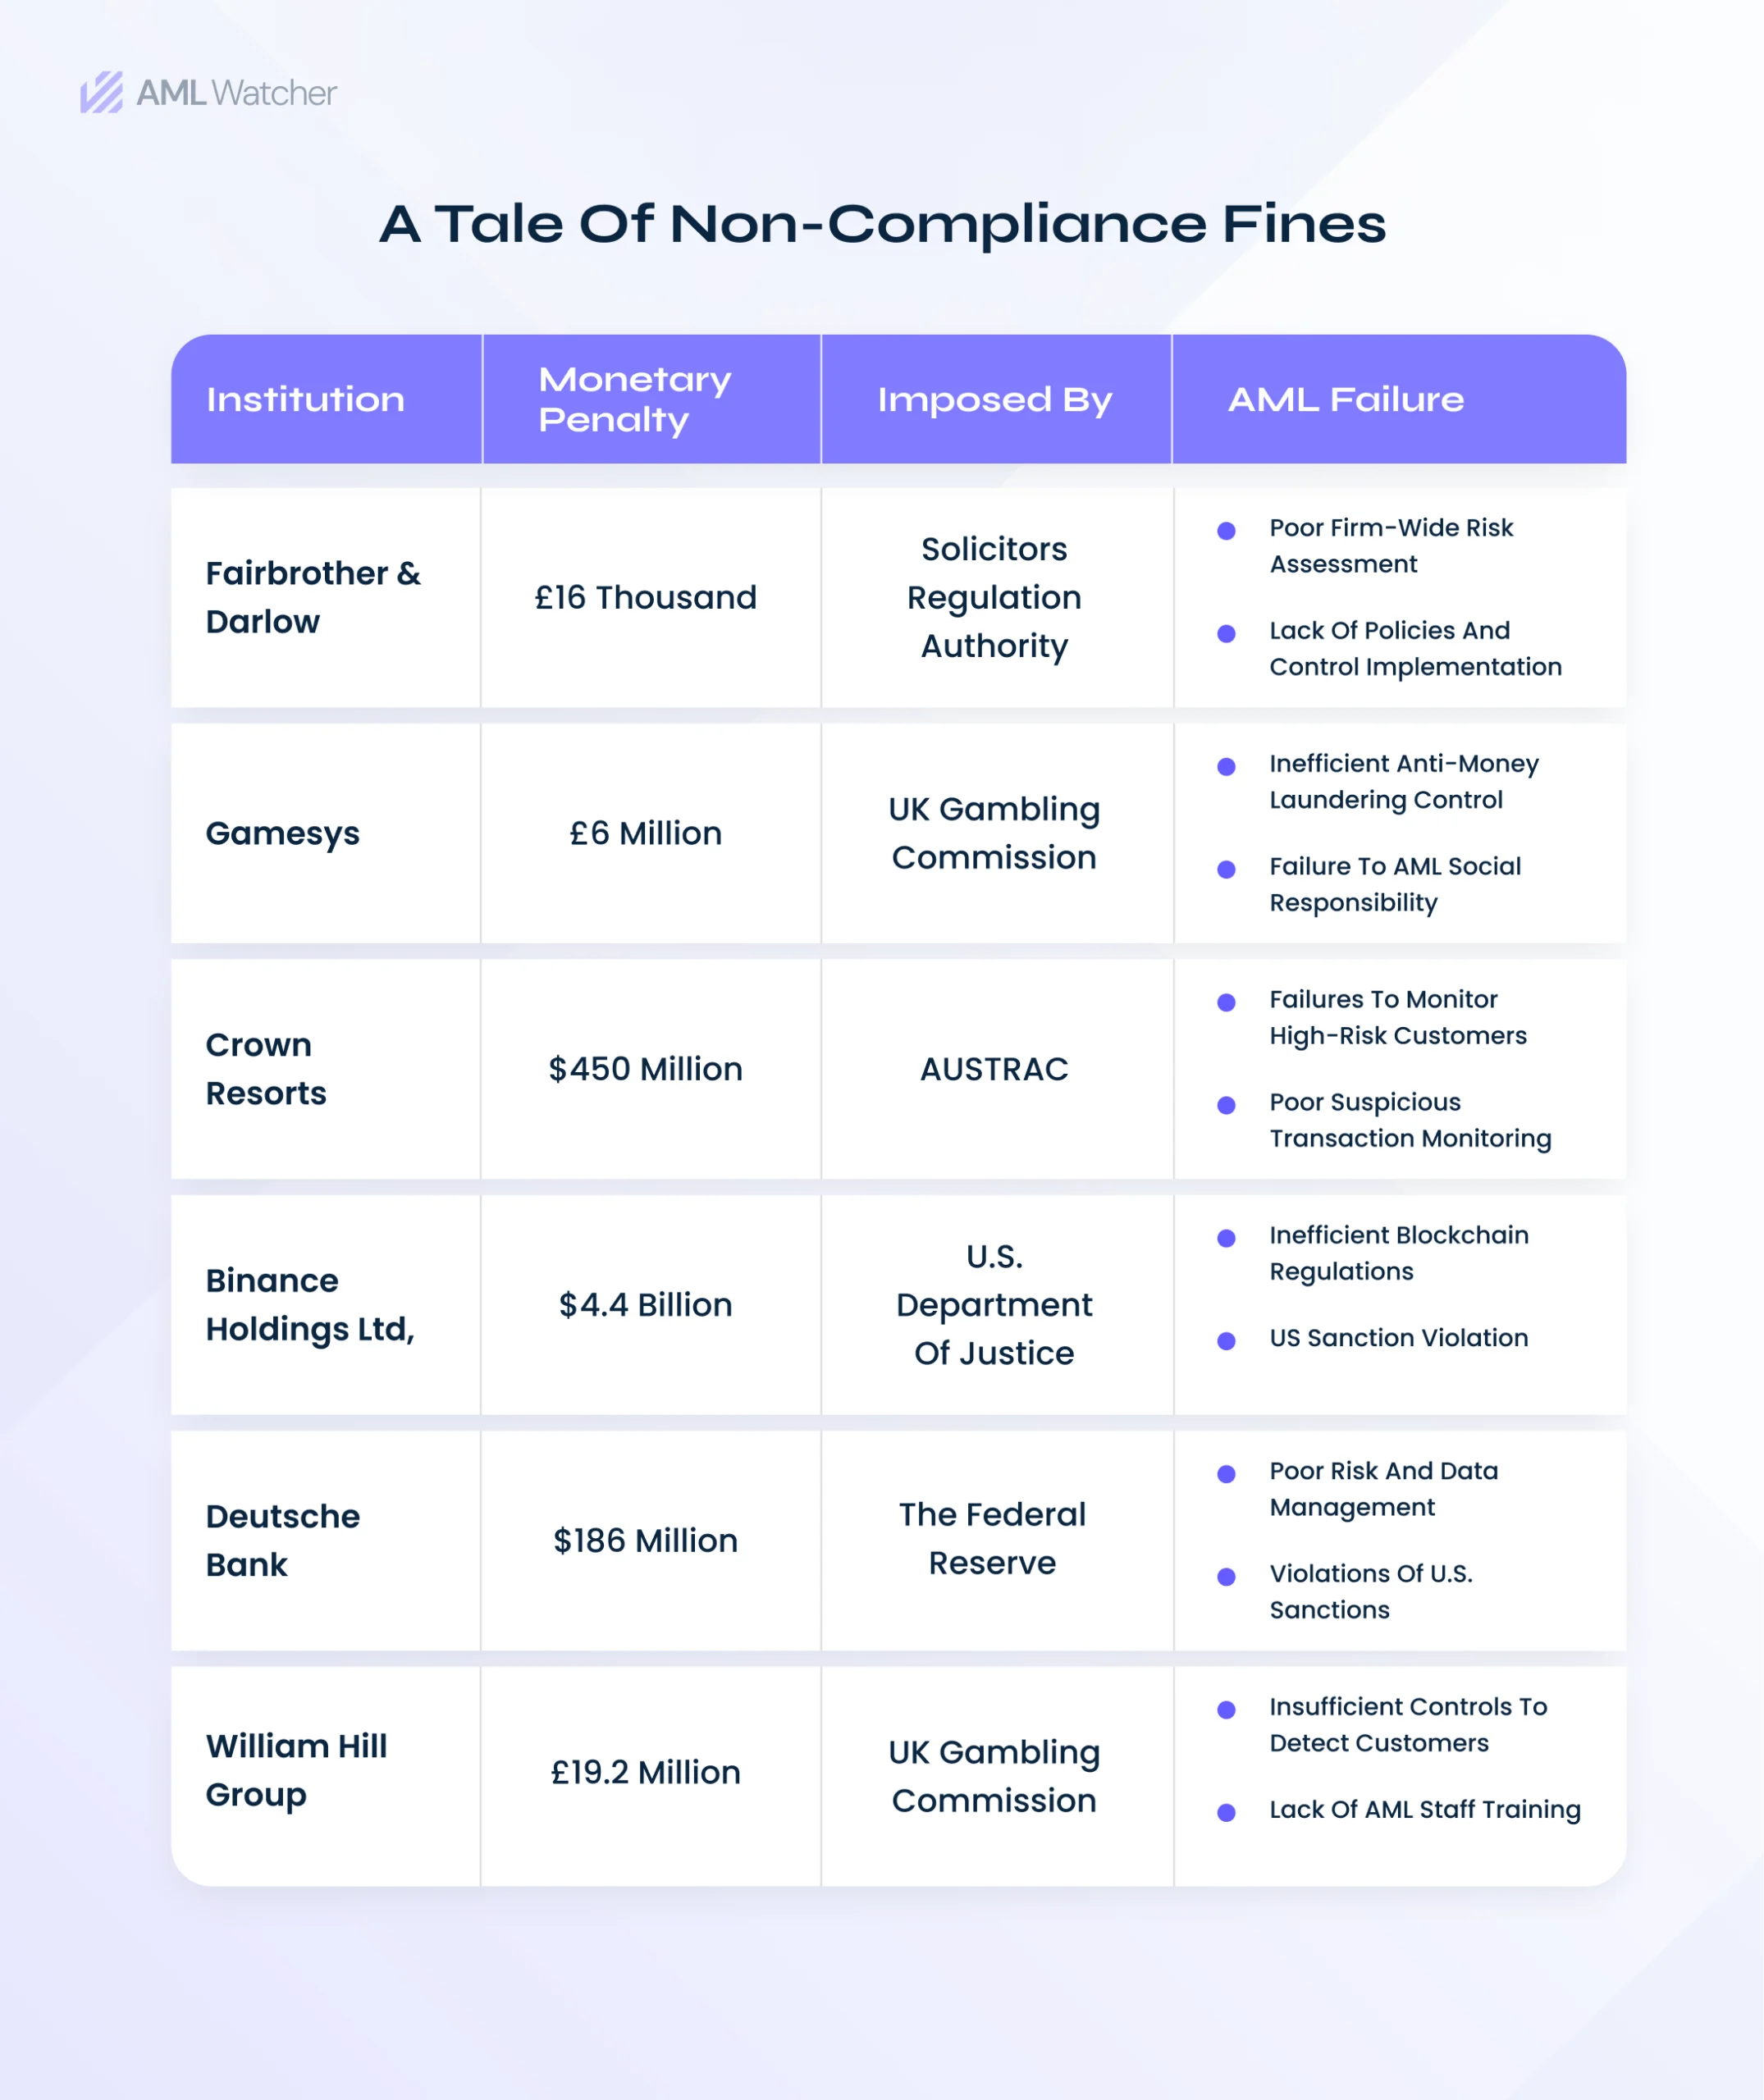 The image shows the major fines of AML checklist non-compliance imposed by global regulators. 